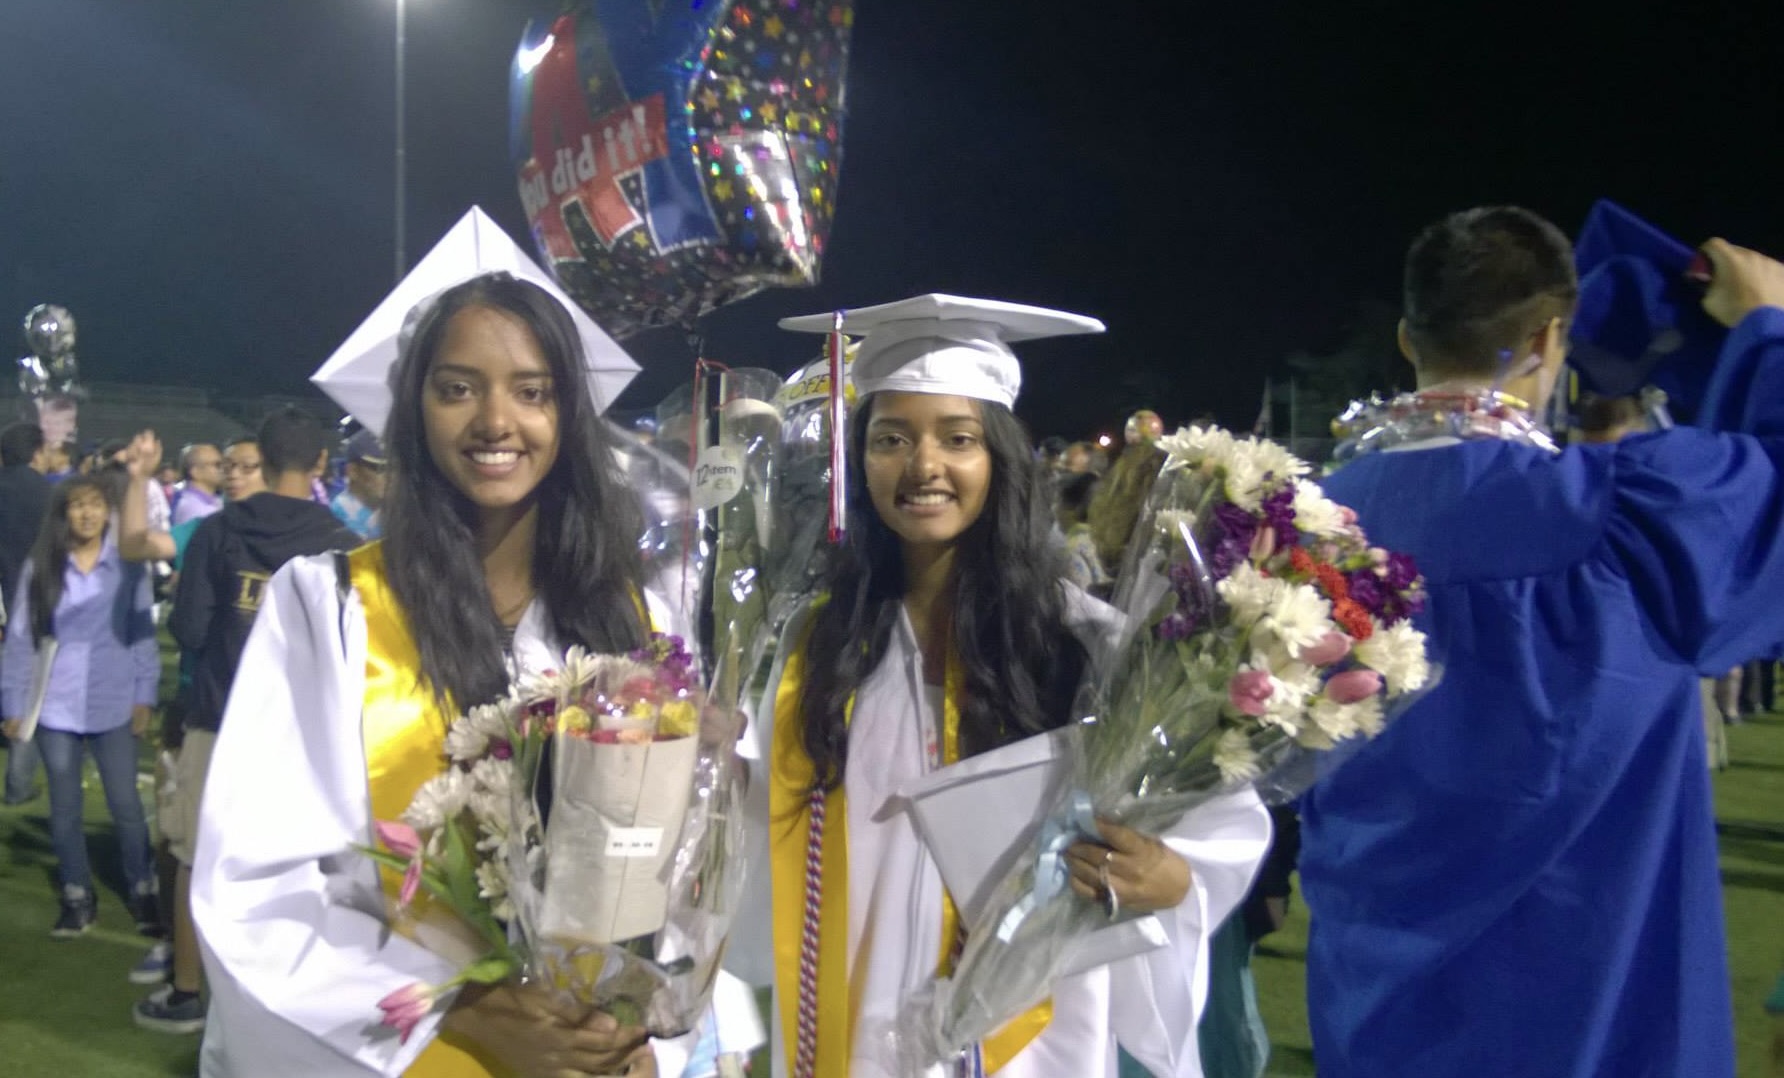 Two teenage girls dressed in graduation gowns and holding flowers smile at the camera.